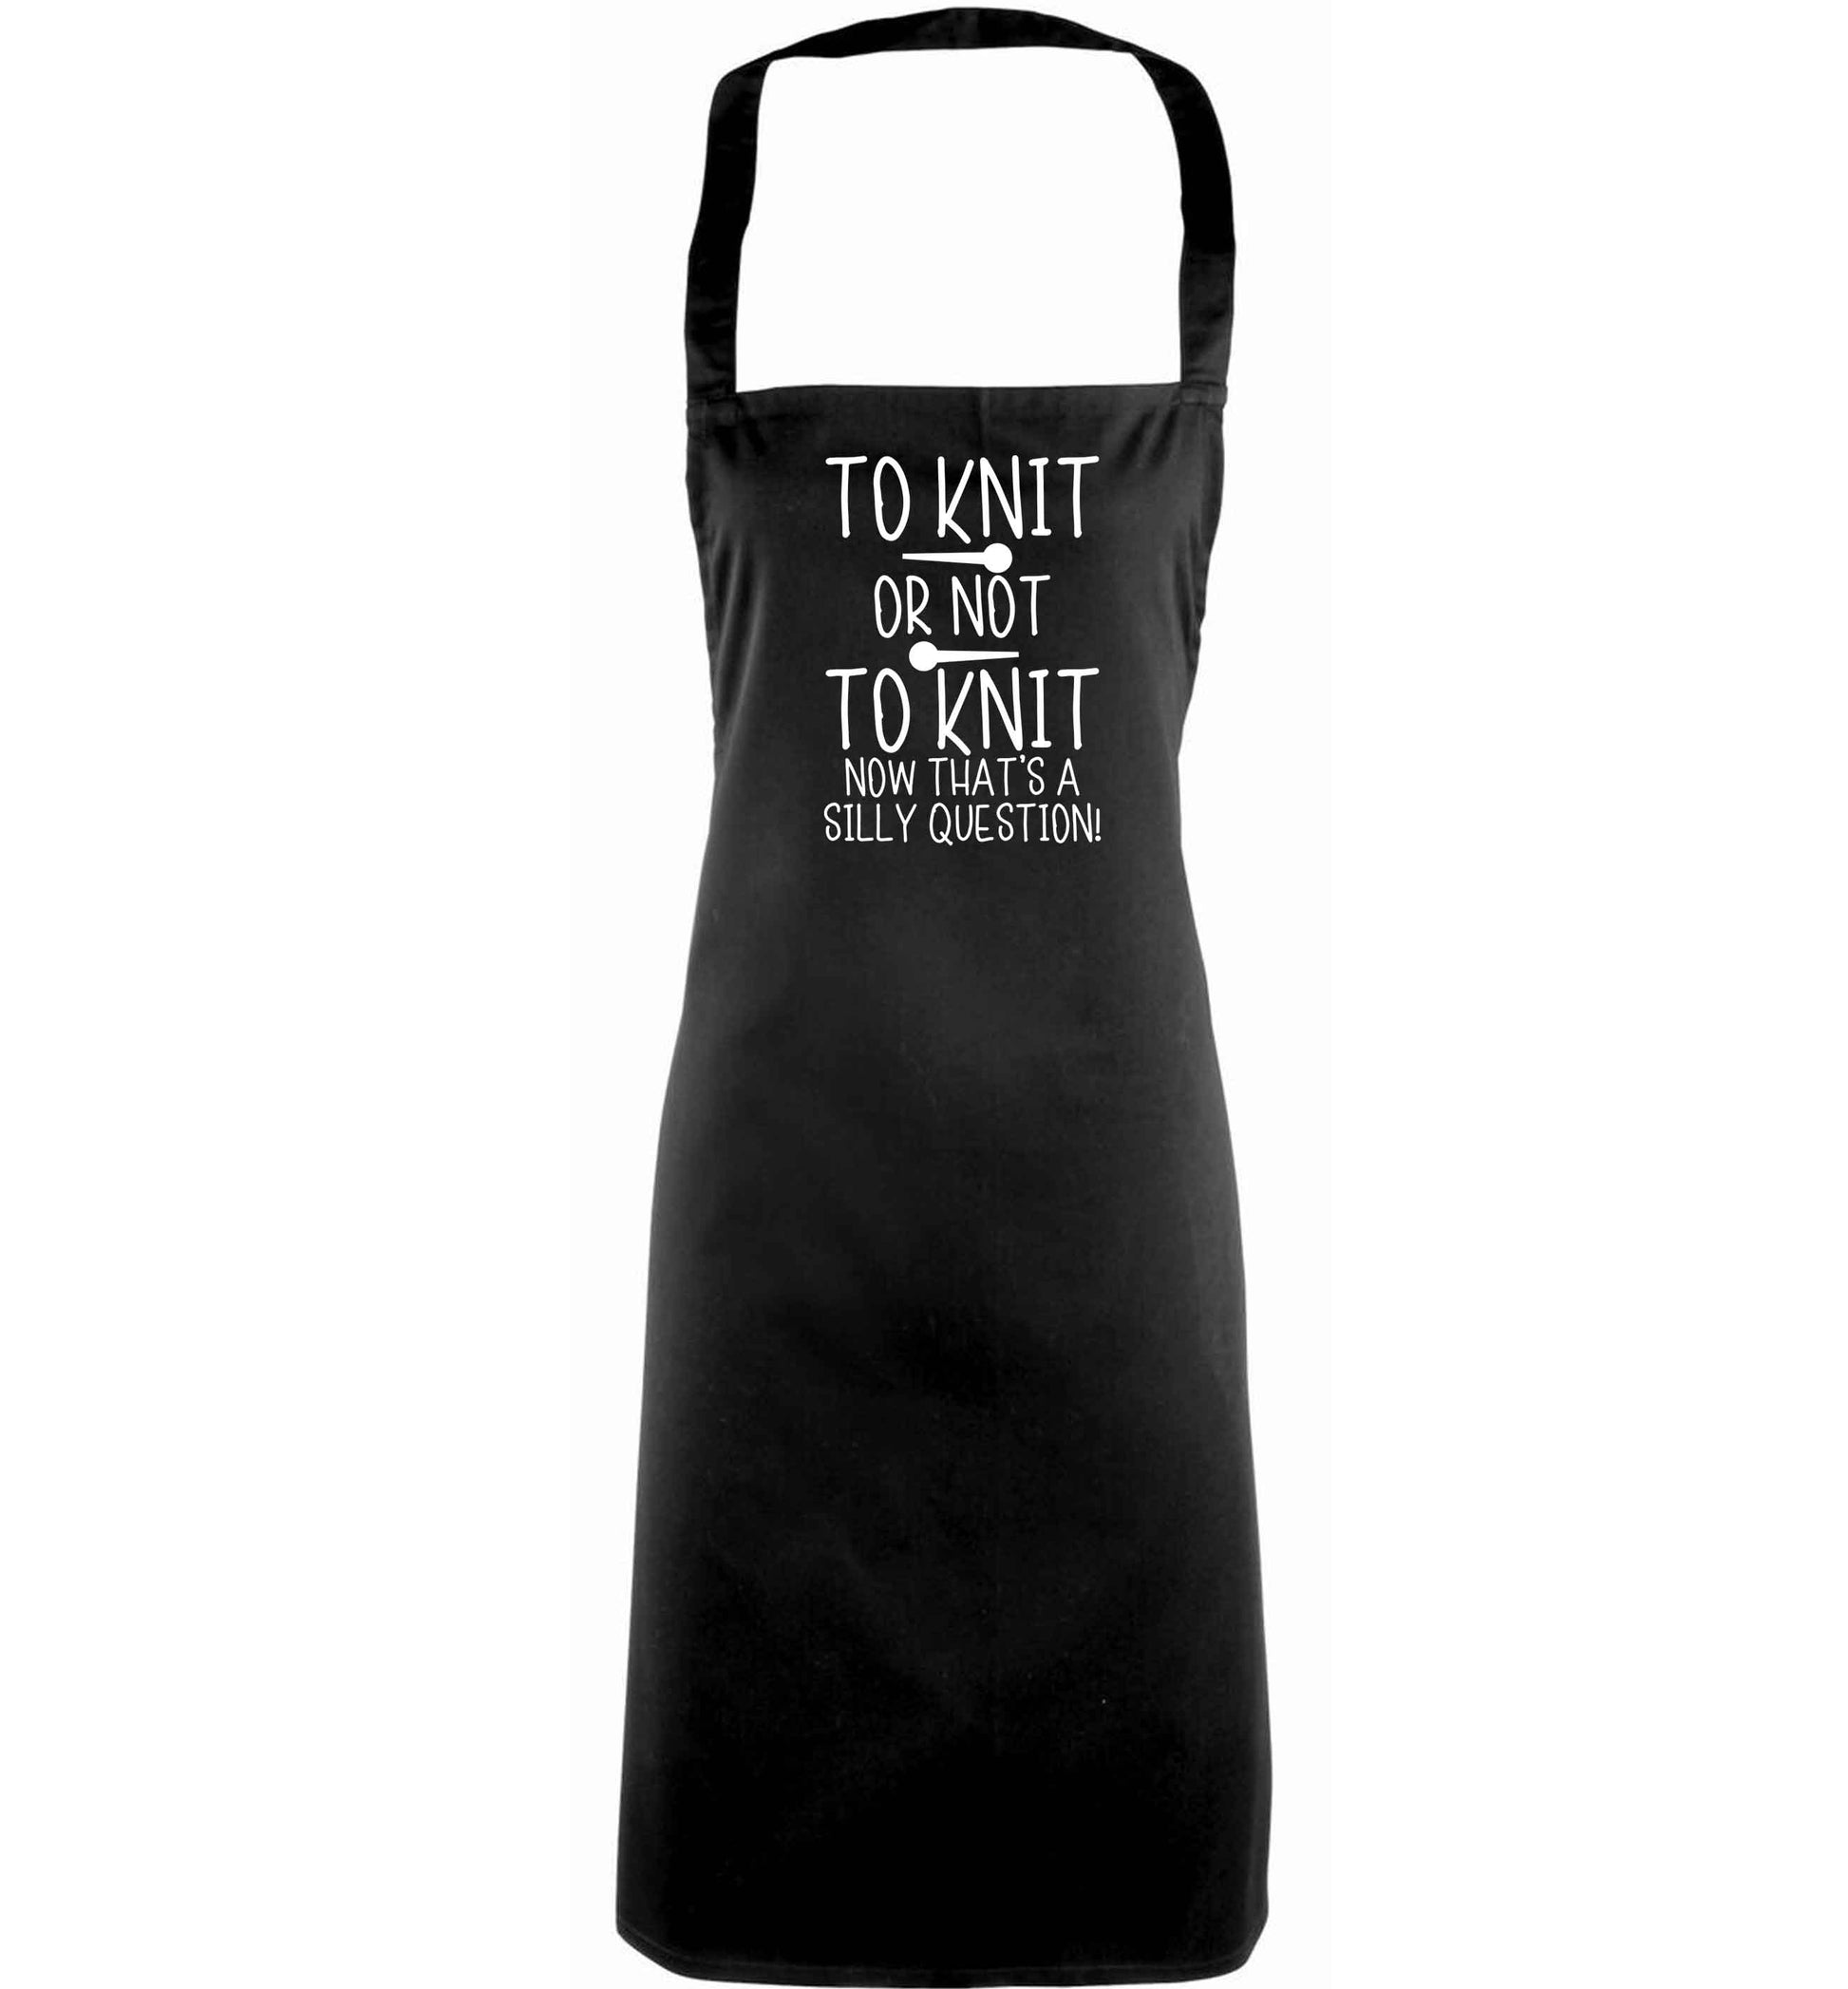 To knit or not to knit now that's a silly question adults black apron